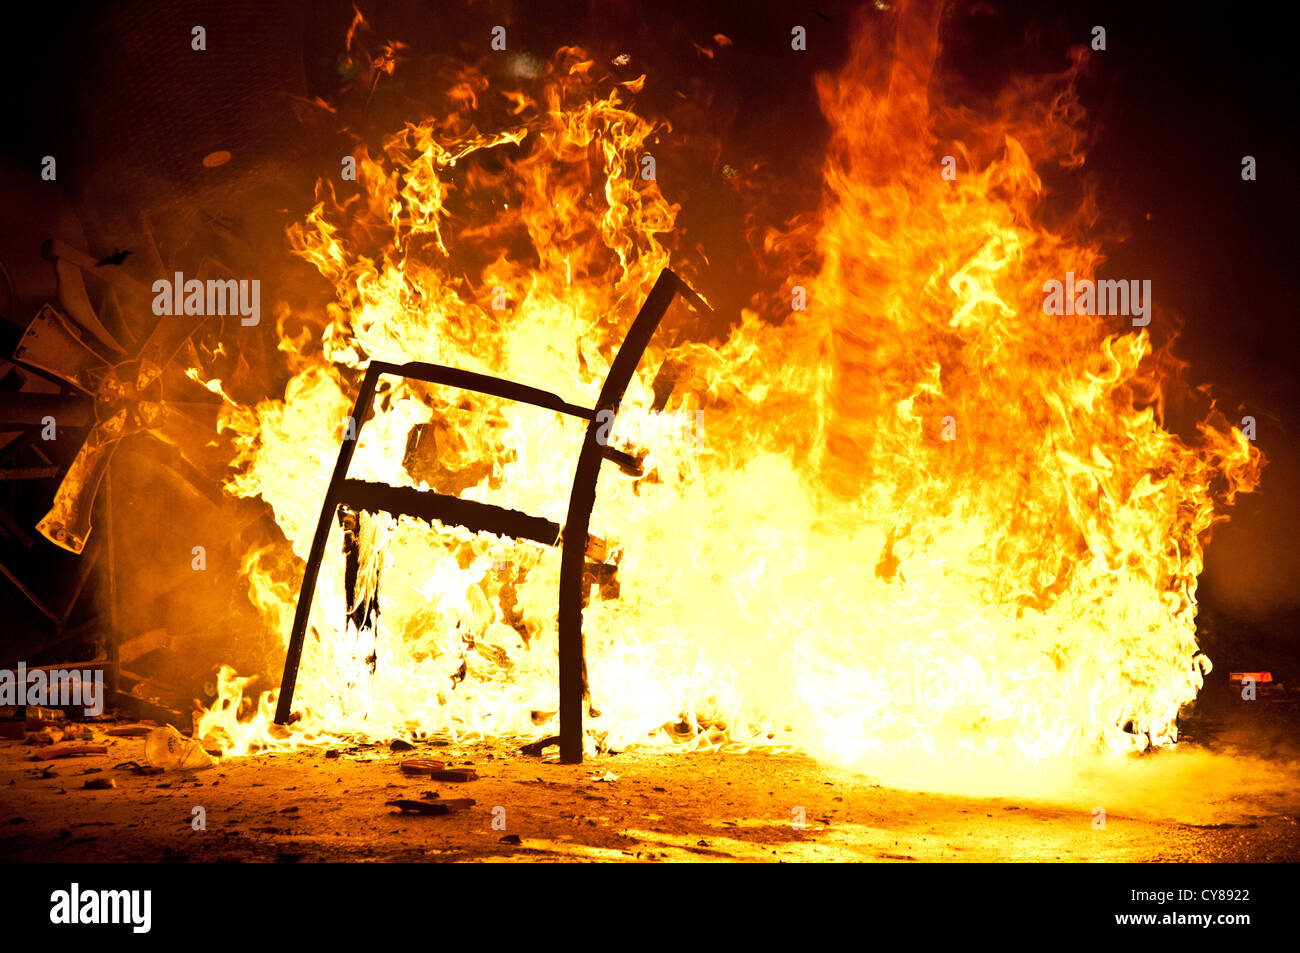 During  riots at syntagma square  protesters have made roadblocks with fire trying to prevent police from coming to close. Stock Photo